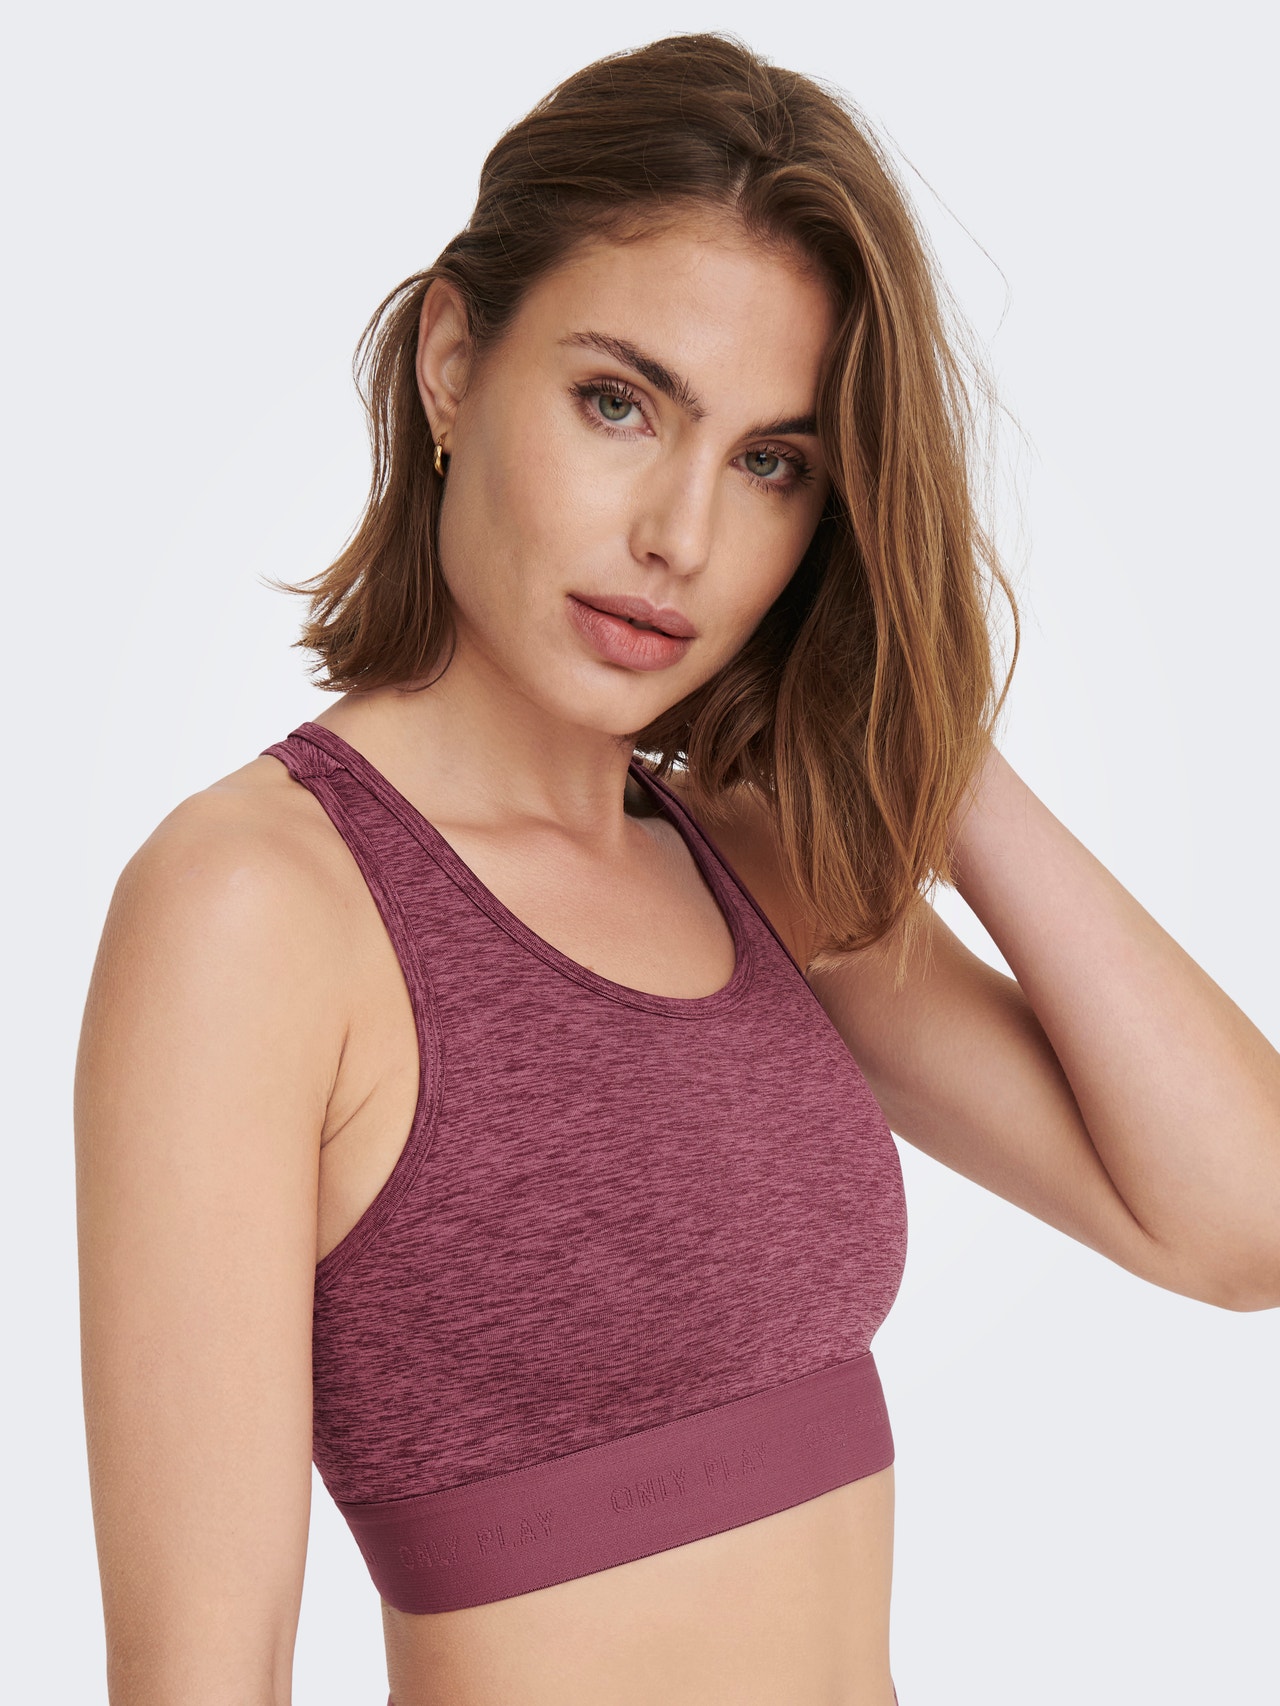 ONLY Racer back Sports Bra With Medium Support -Crushed Berry - 15261325